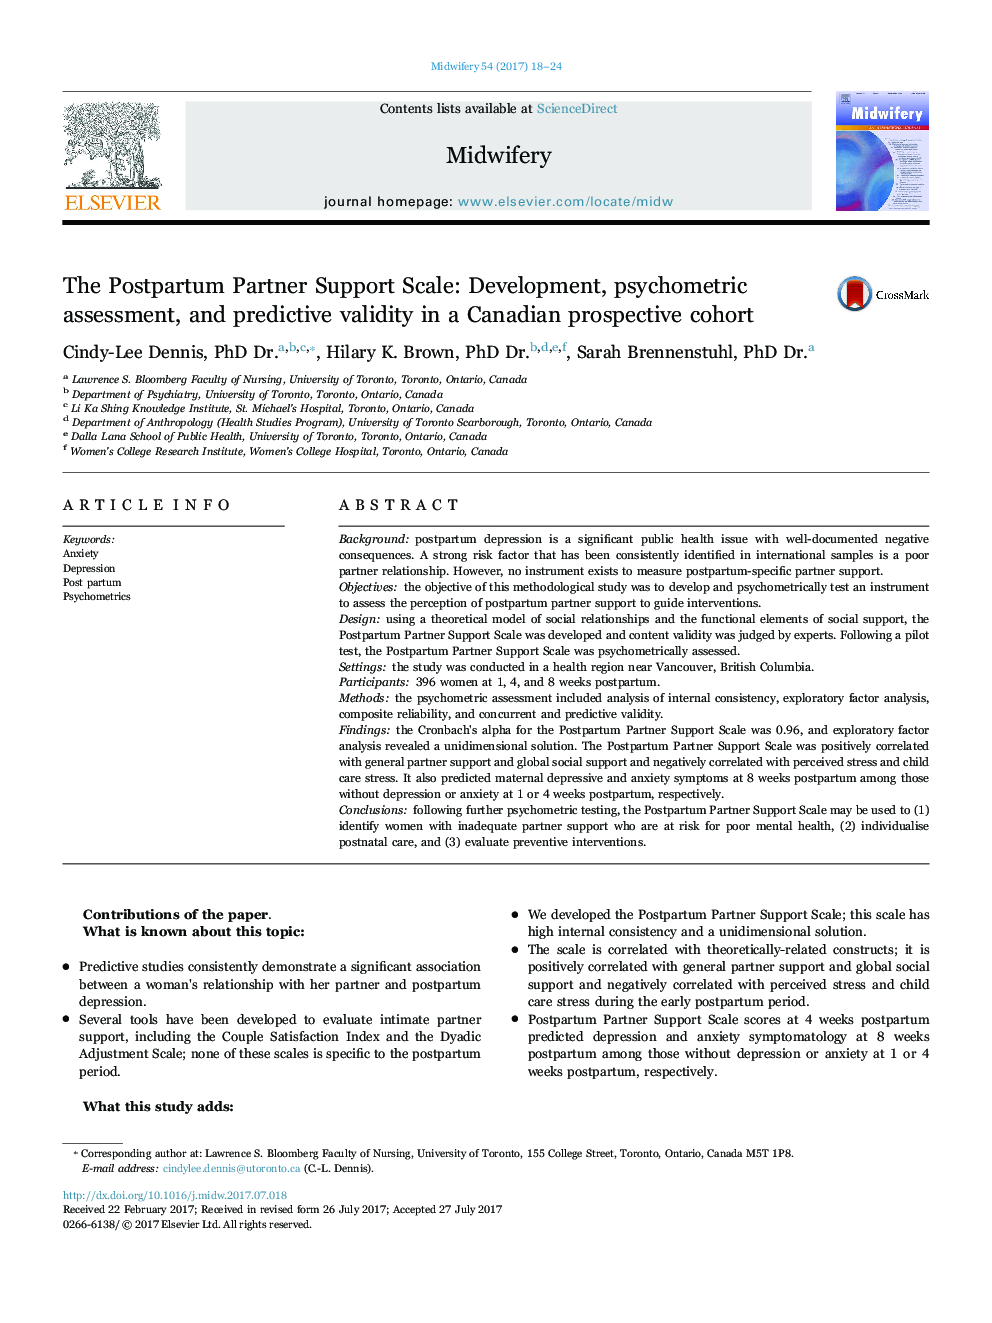 The Postpartum Partner Support Scale: Development, psychometric assessment, and predictive validity in a Canadian prospective cohort